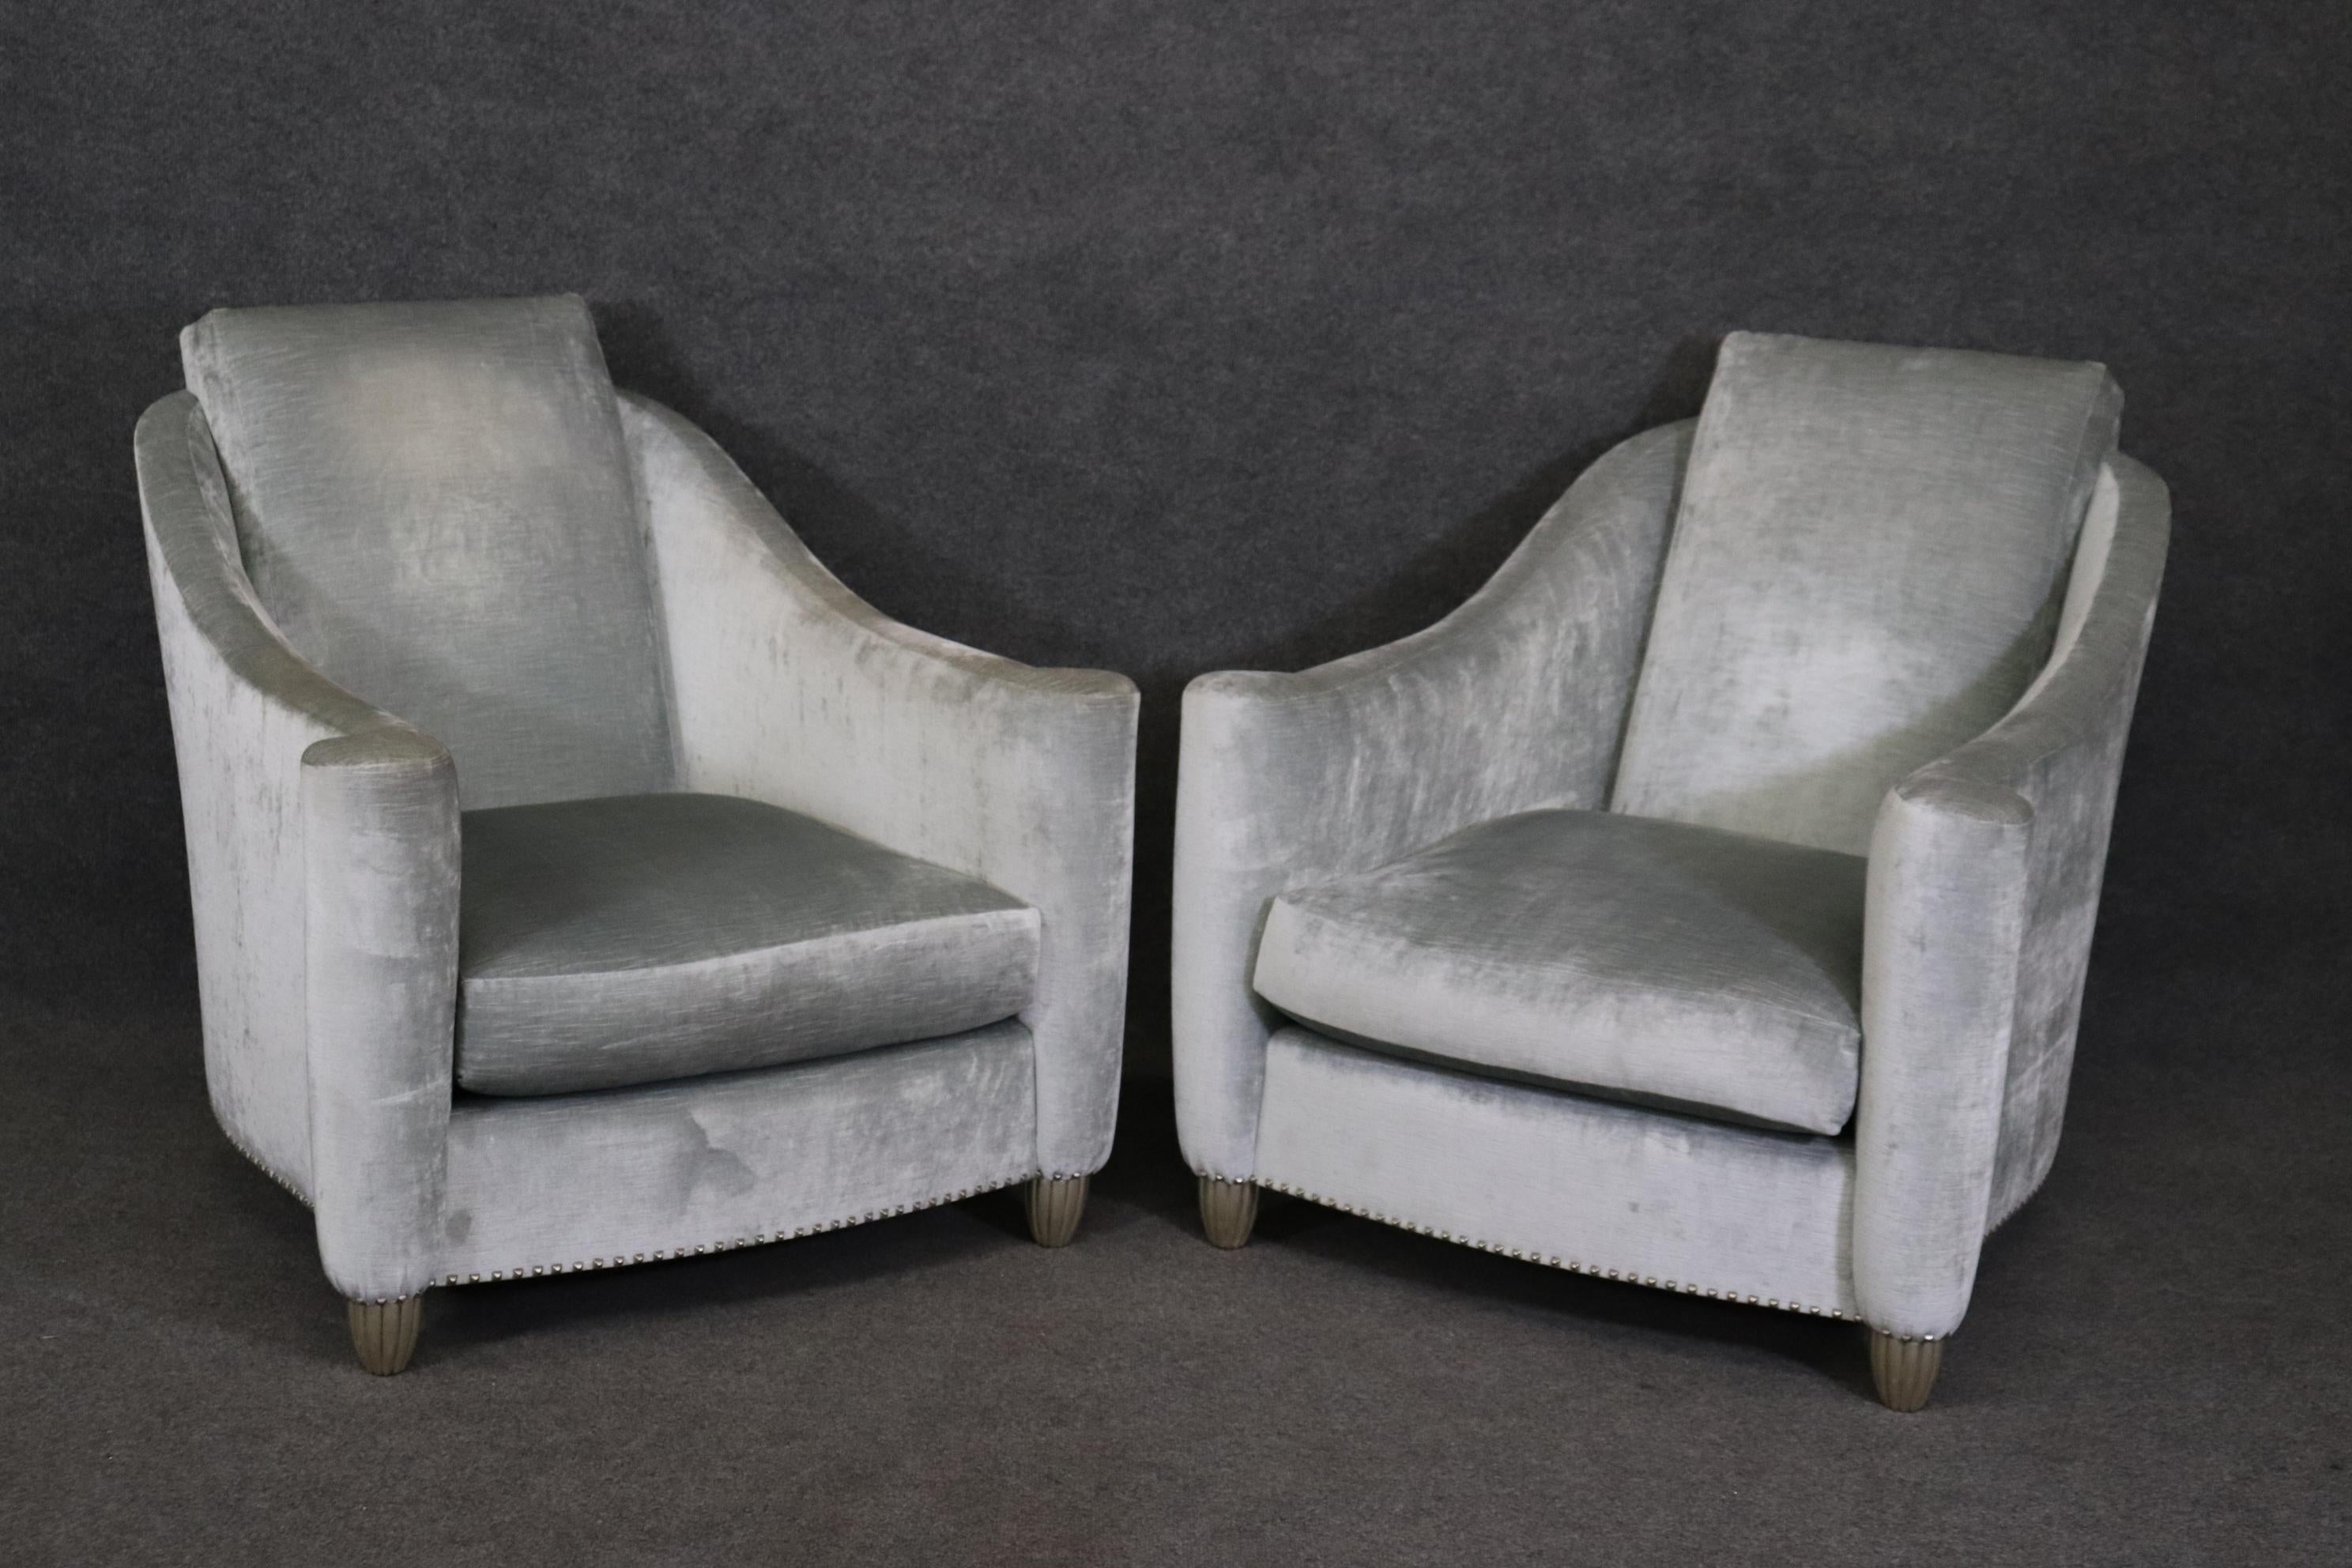 This is a stunning pair of silver-gray velvet upholstered club chairs with matching ottomans. The chairs are absolutely gorgeous and in good used condition. I did not see any stains but they are used and may have some slight or minute stains that I